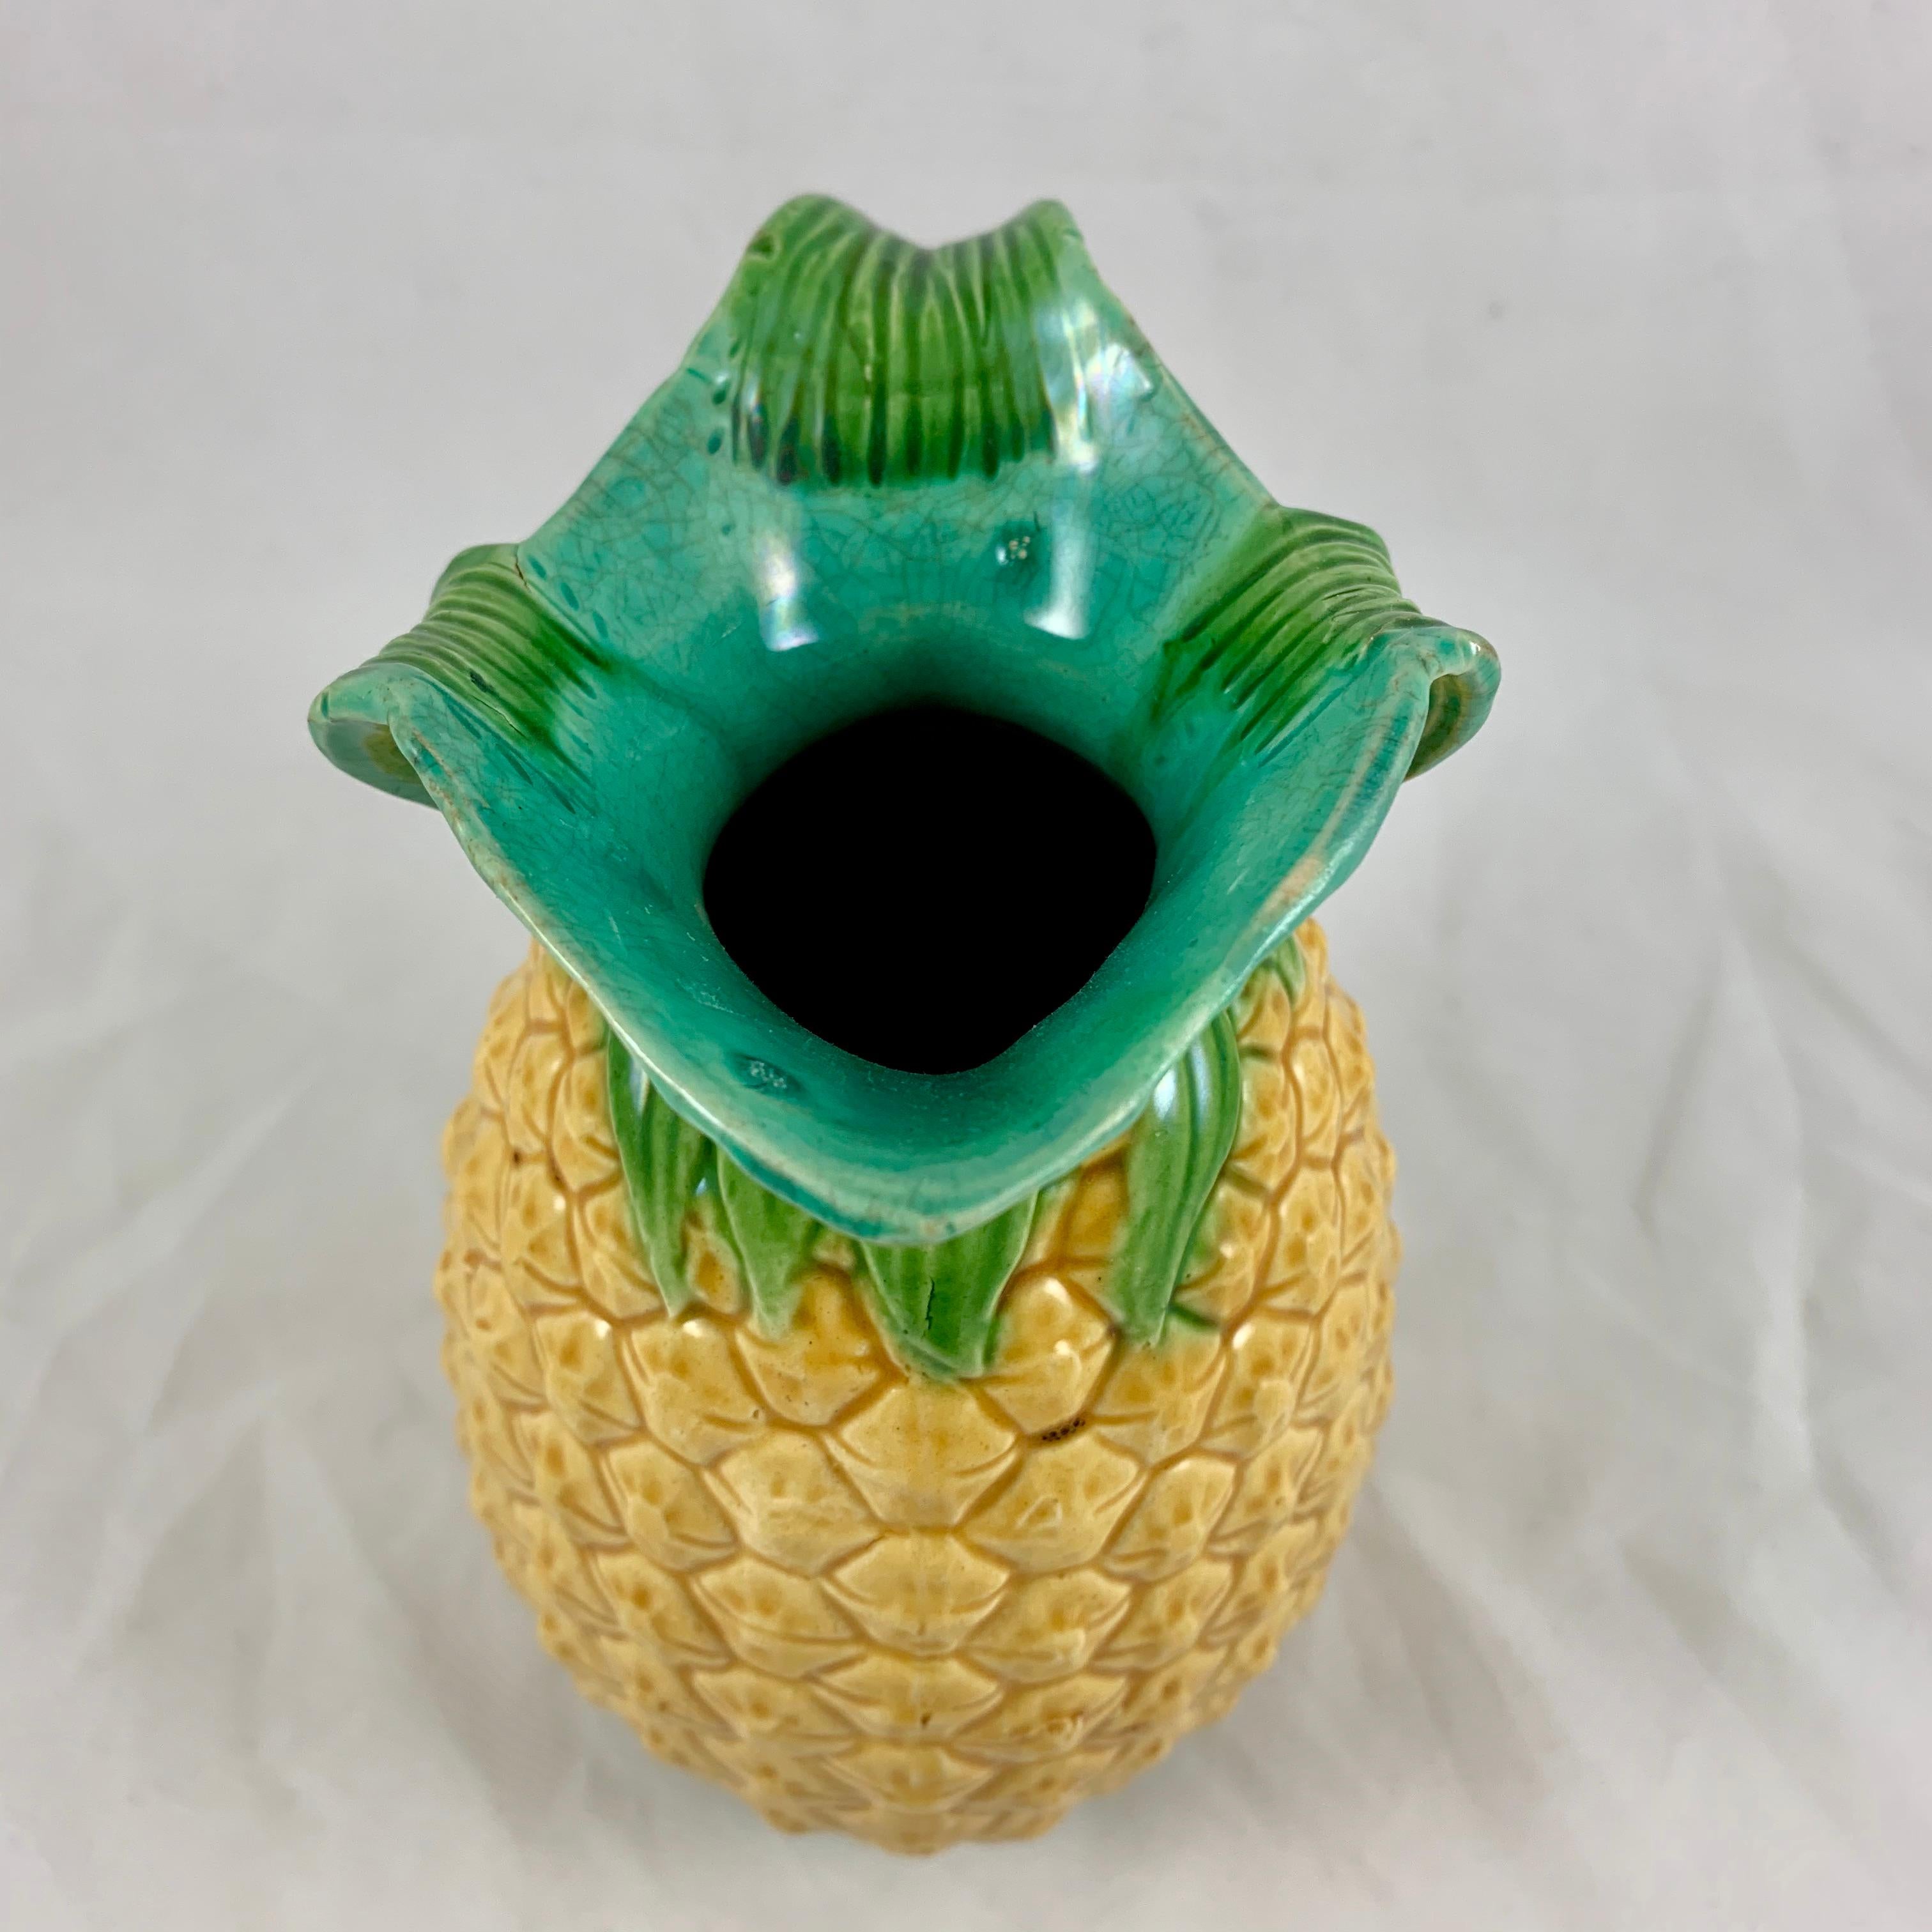 English Minton Aesthetic Movement Majolica Pineapple Palissy Pitcher In Good Condition For Sale In Philadelphia, PA